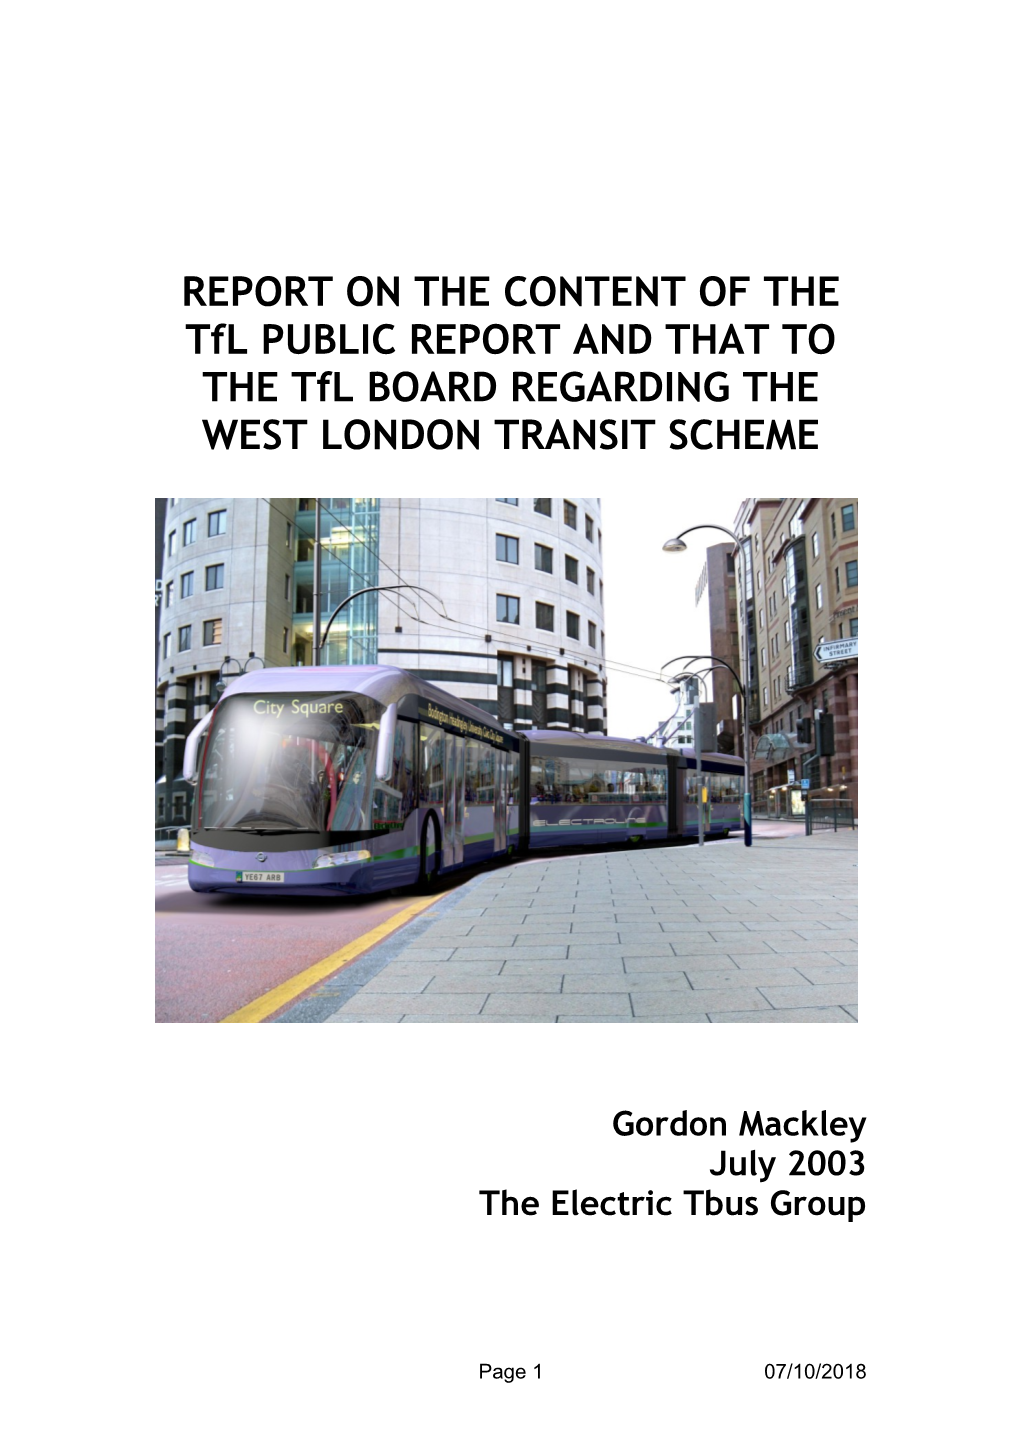 WEST LONDON TRANSIT COST ANALYSIS RE-APPRAISED INCORPORATING ITEMS from Tfl REPORT